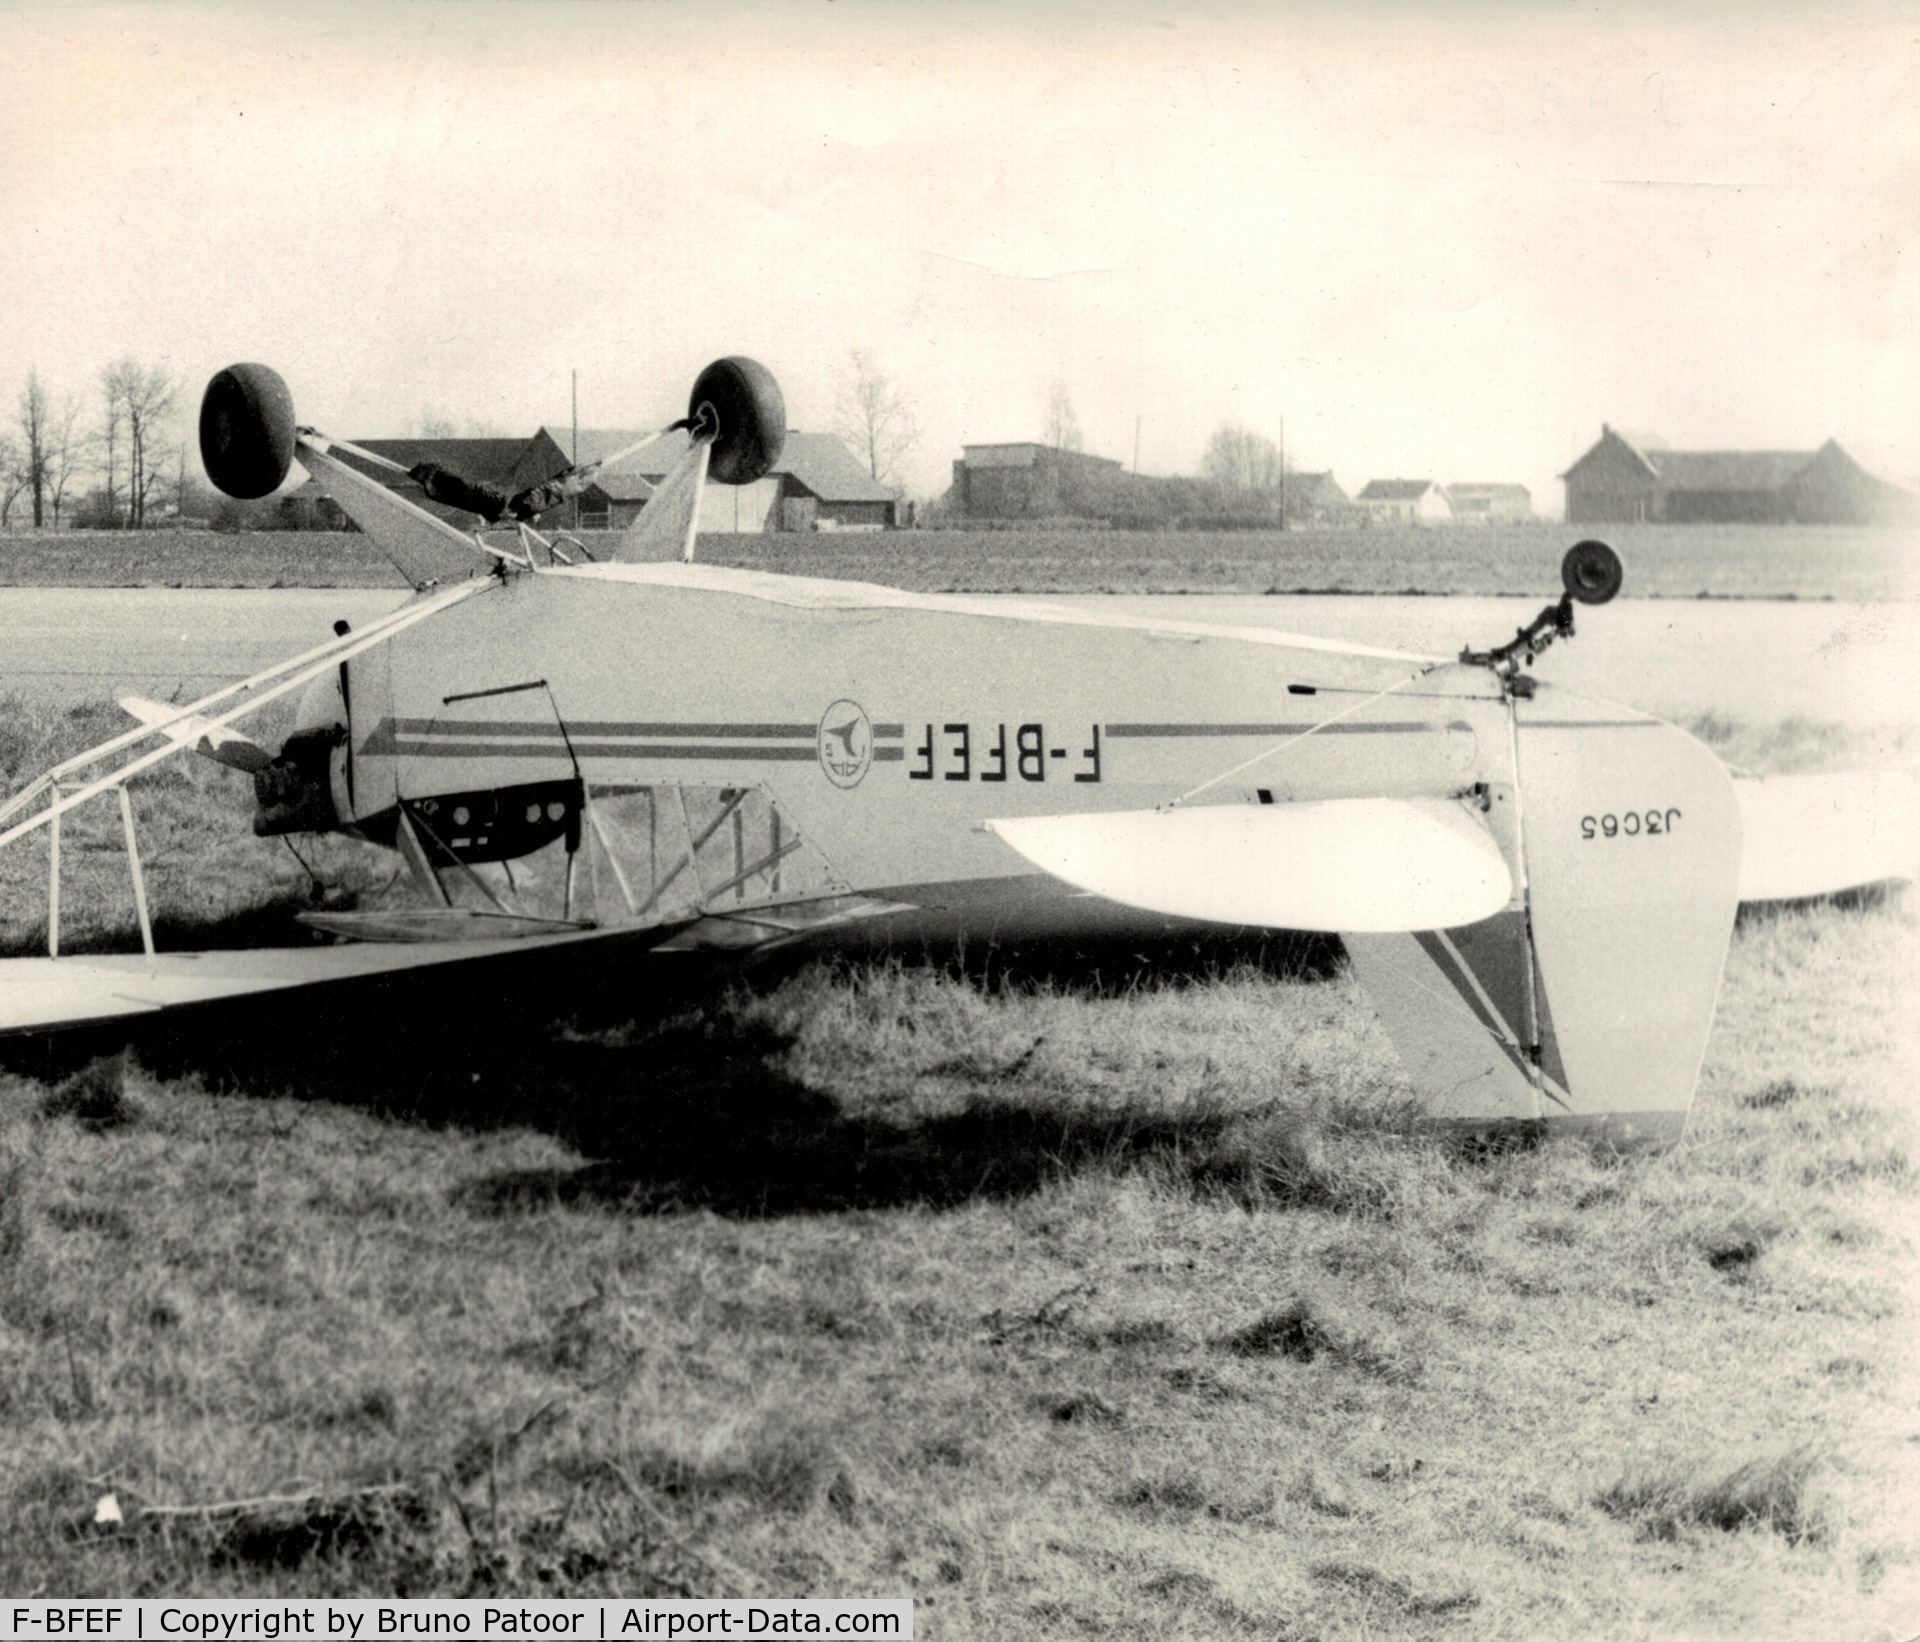 F-BFEF, Piper J3C-65 Cub Cub C/N 13288, During the year 1972 at Merville airport. I learned to be a pilot with this plane